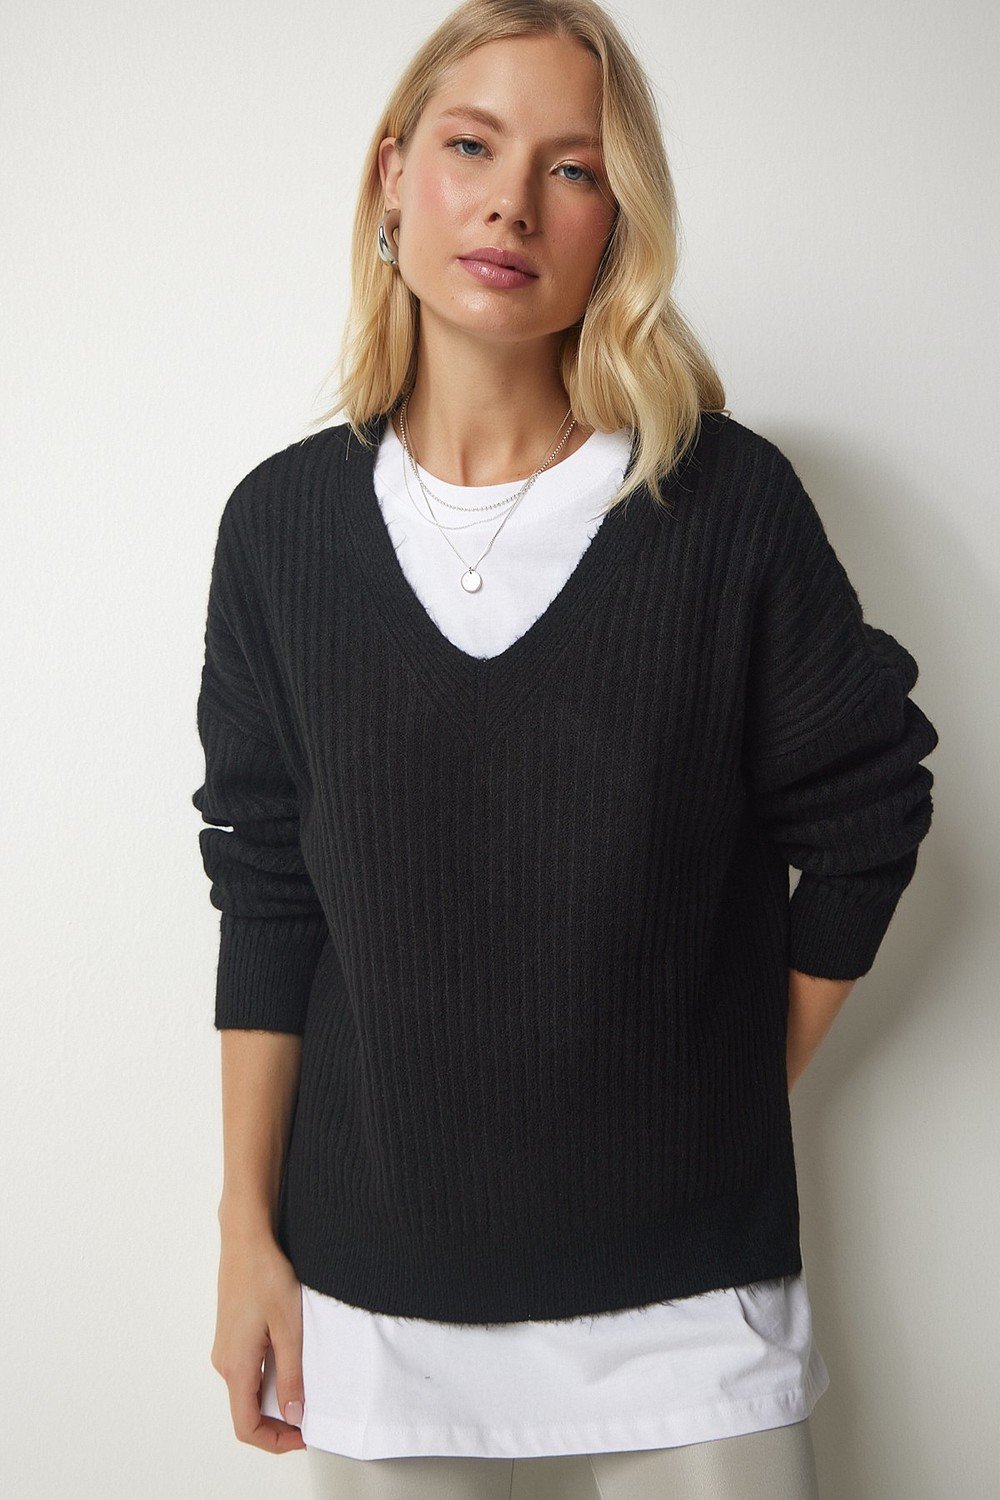 Happiness İstanbul Women's Black V-Neck Textured Knitwear Sweater